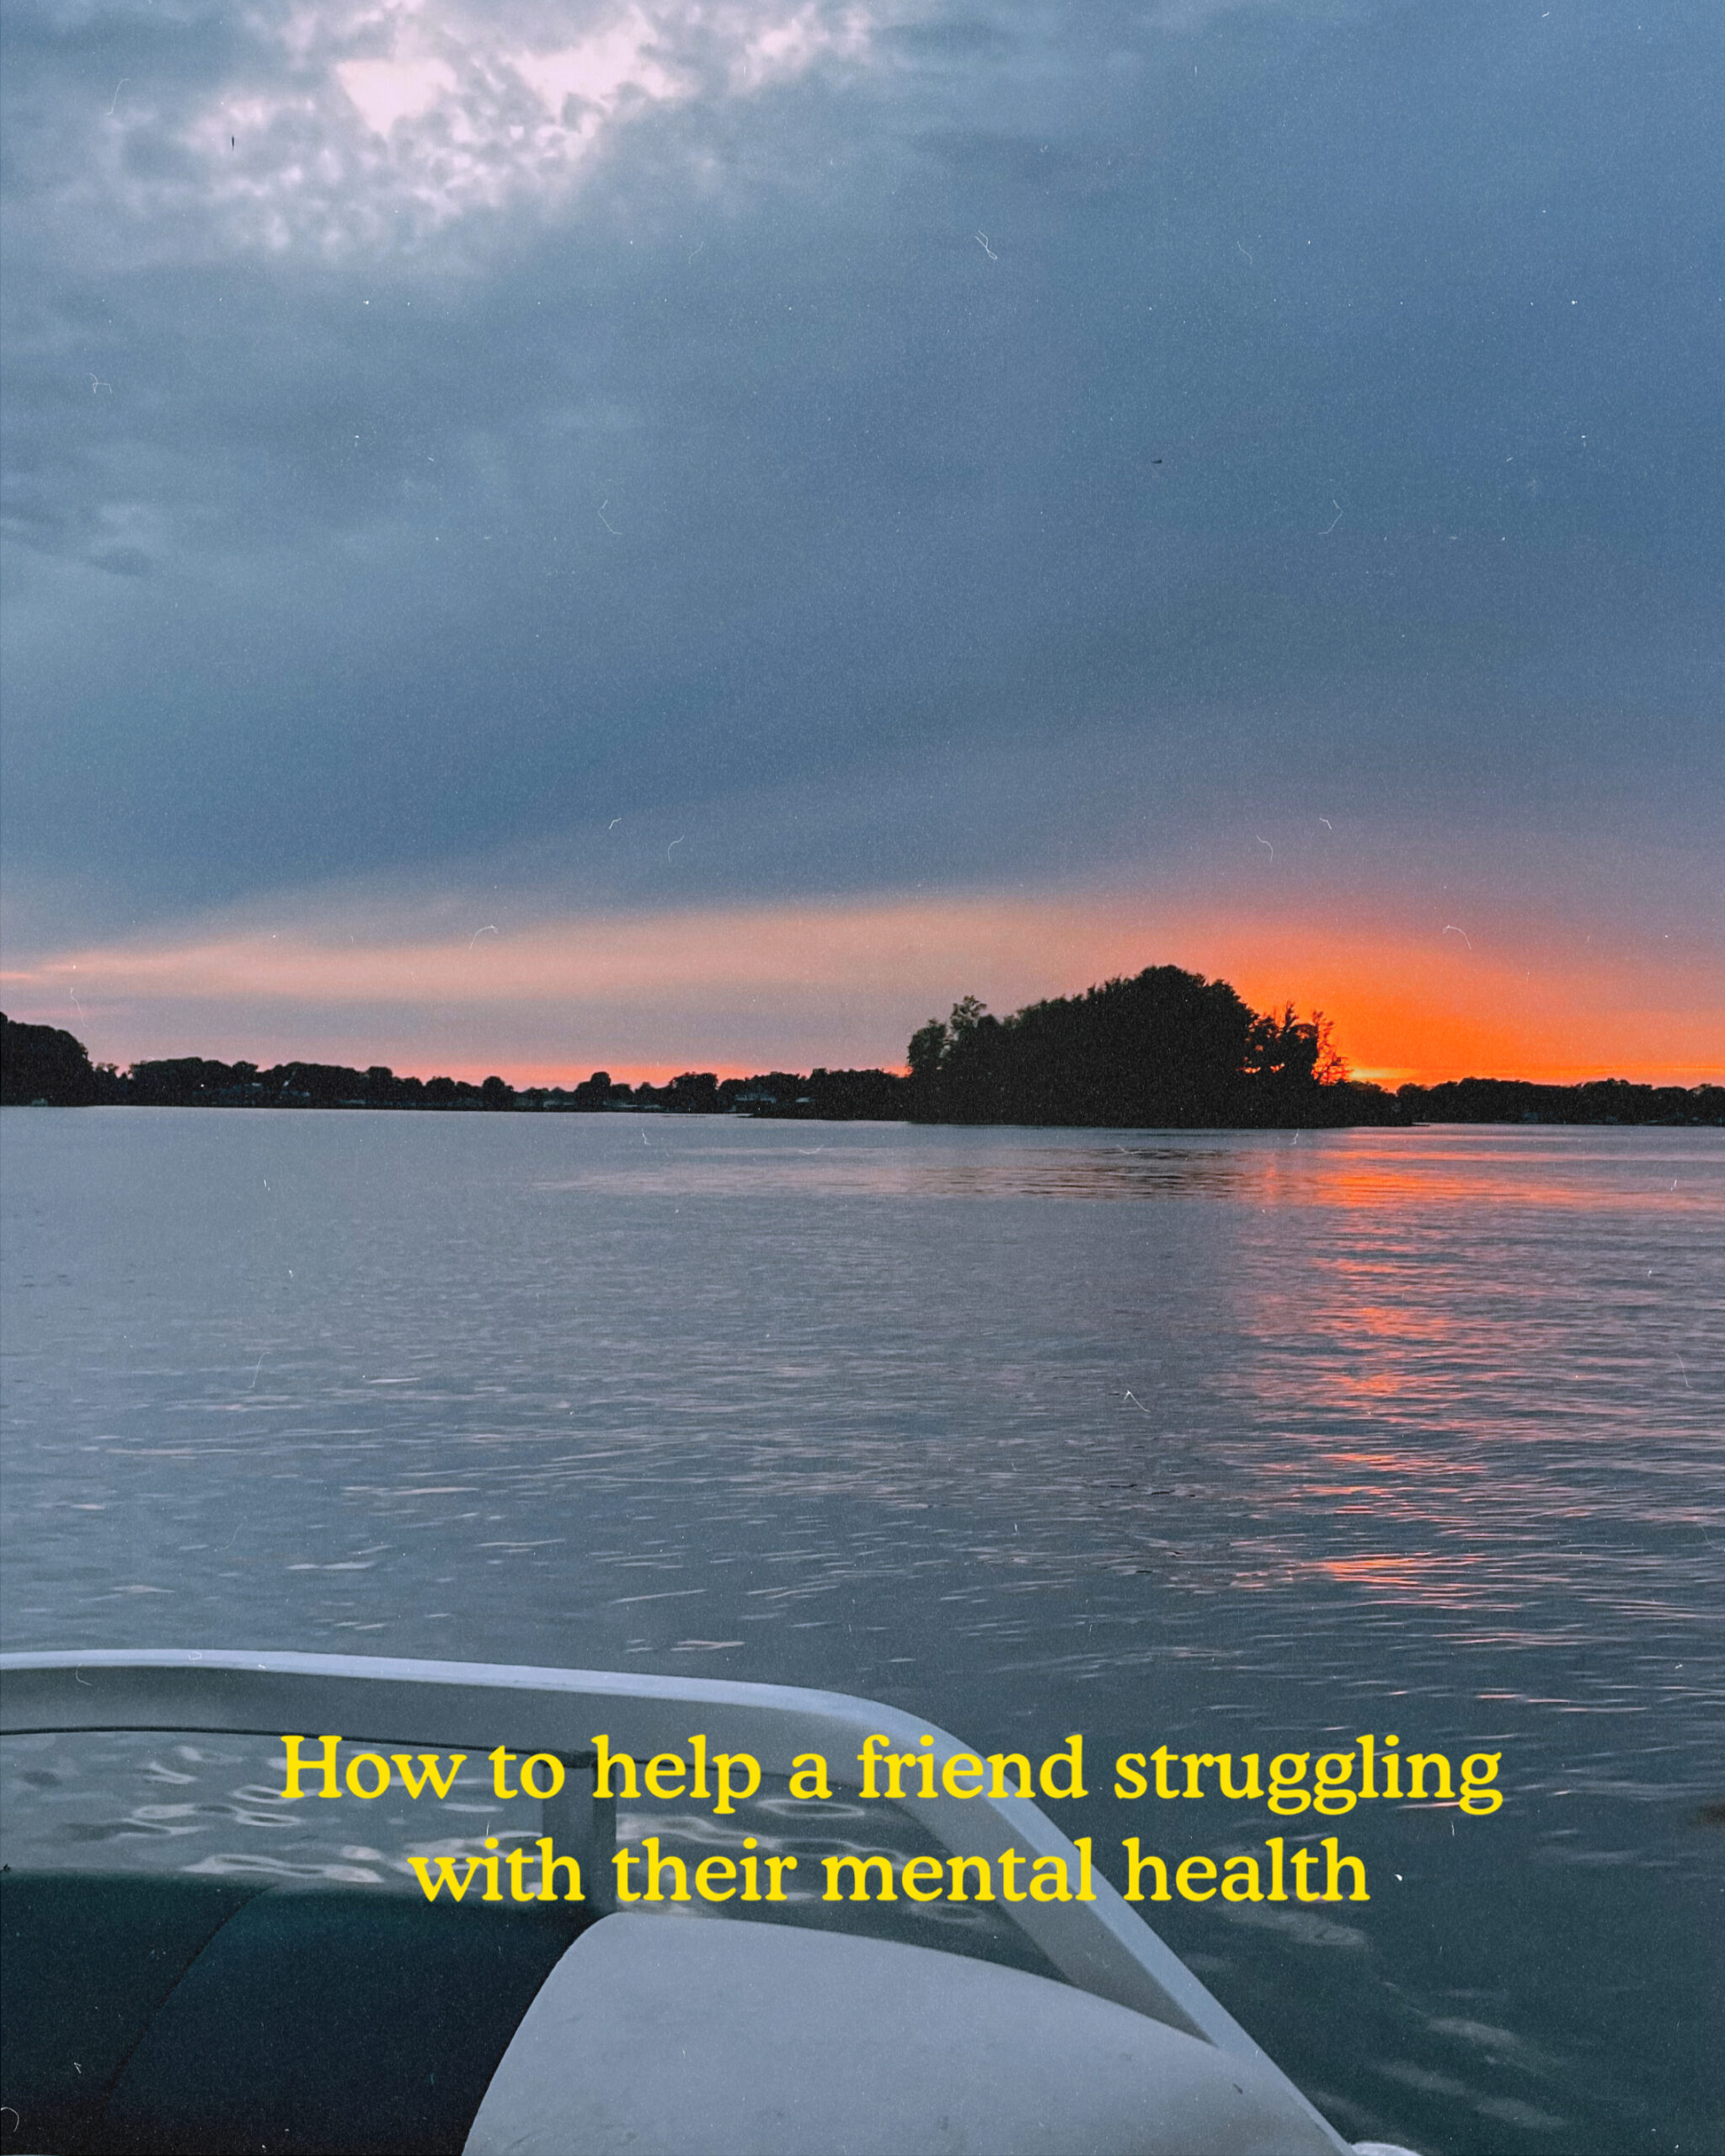 Suicide Prevention: How to Help a Friend Who is Struggling with Their Mental Health